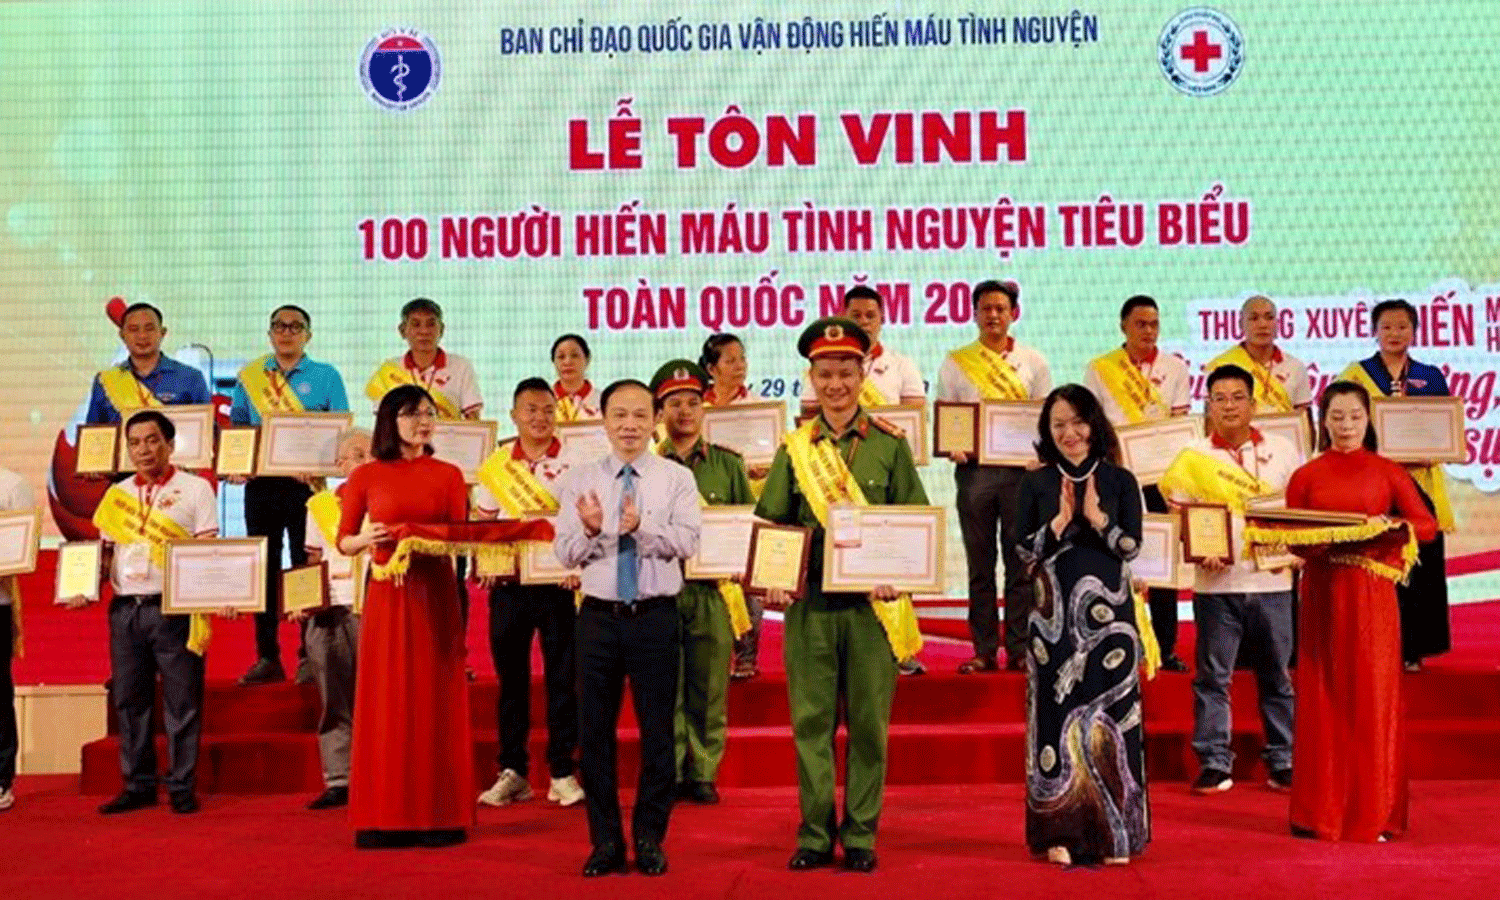 Exemplary voluntary blood donors honoured at the ceremony (Photo: DT).